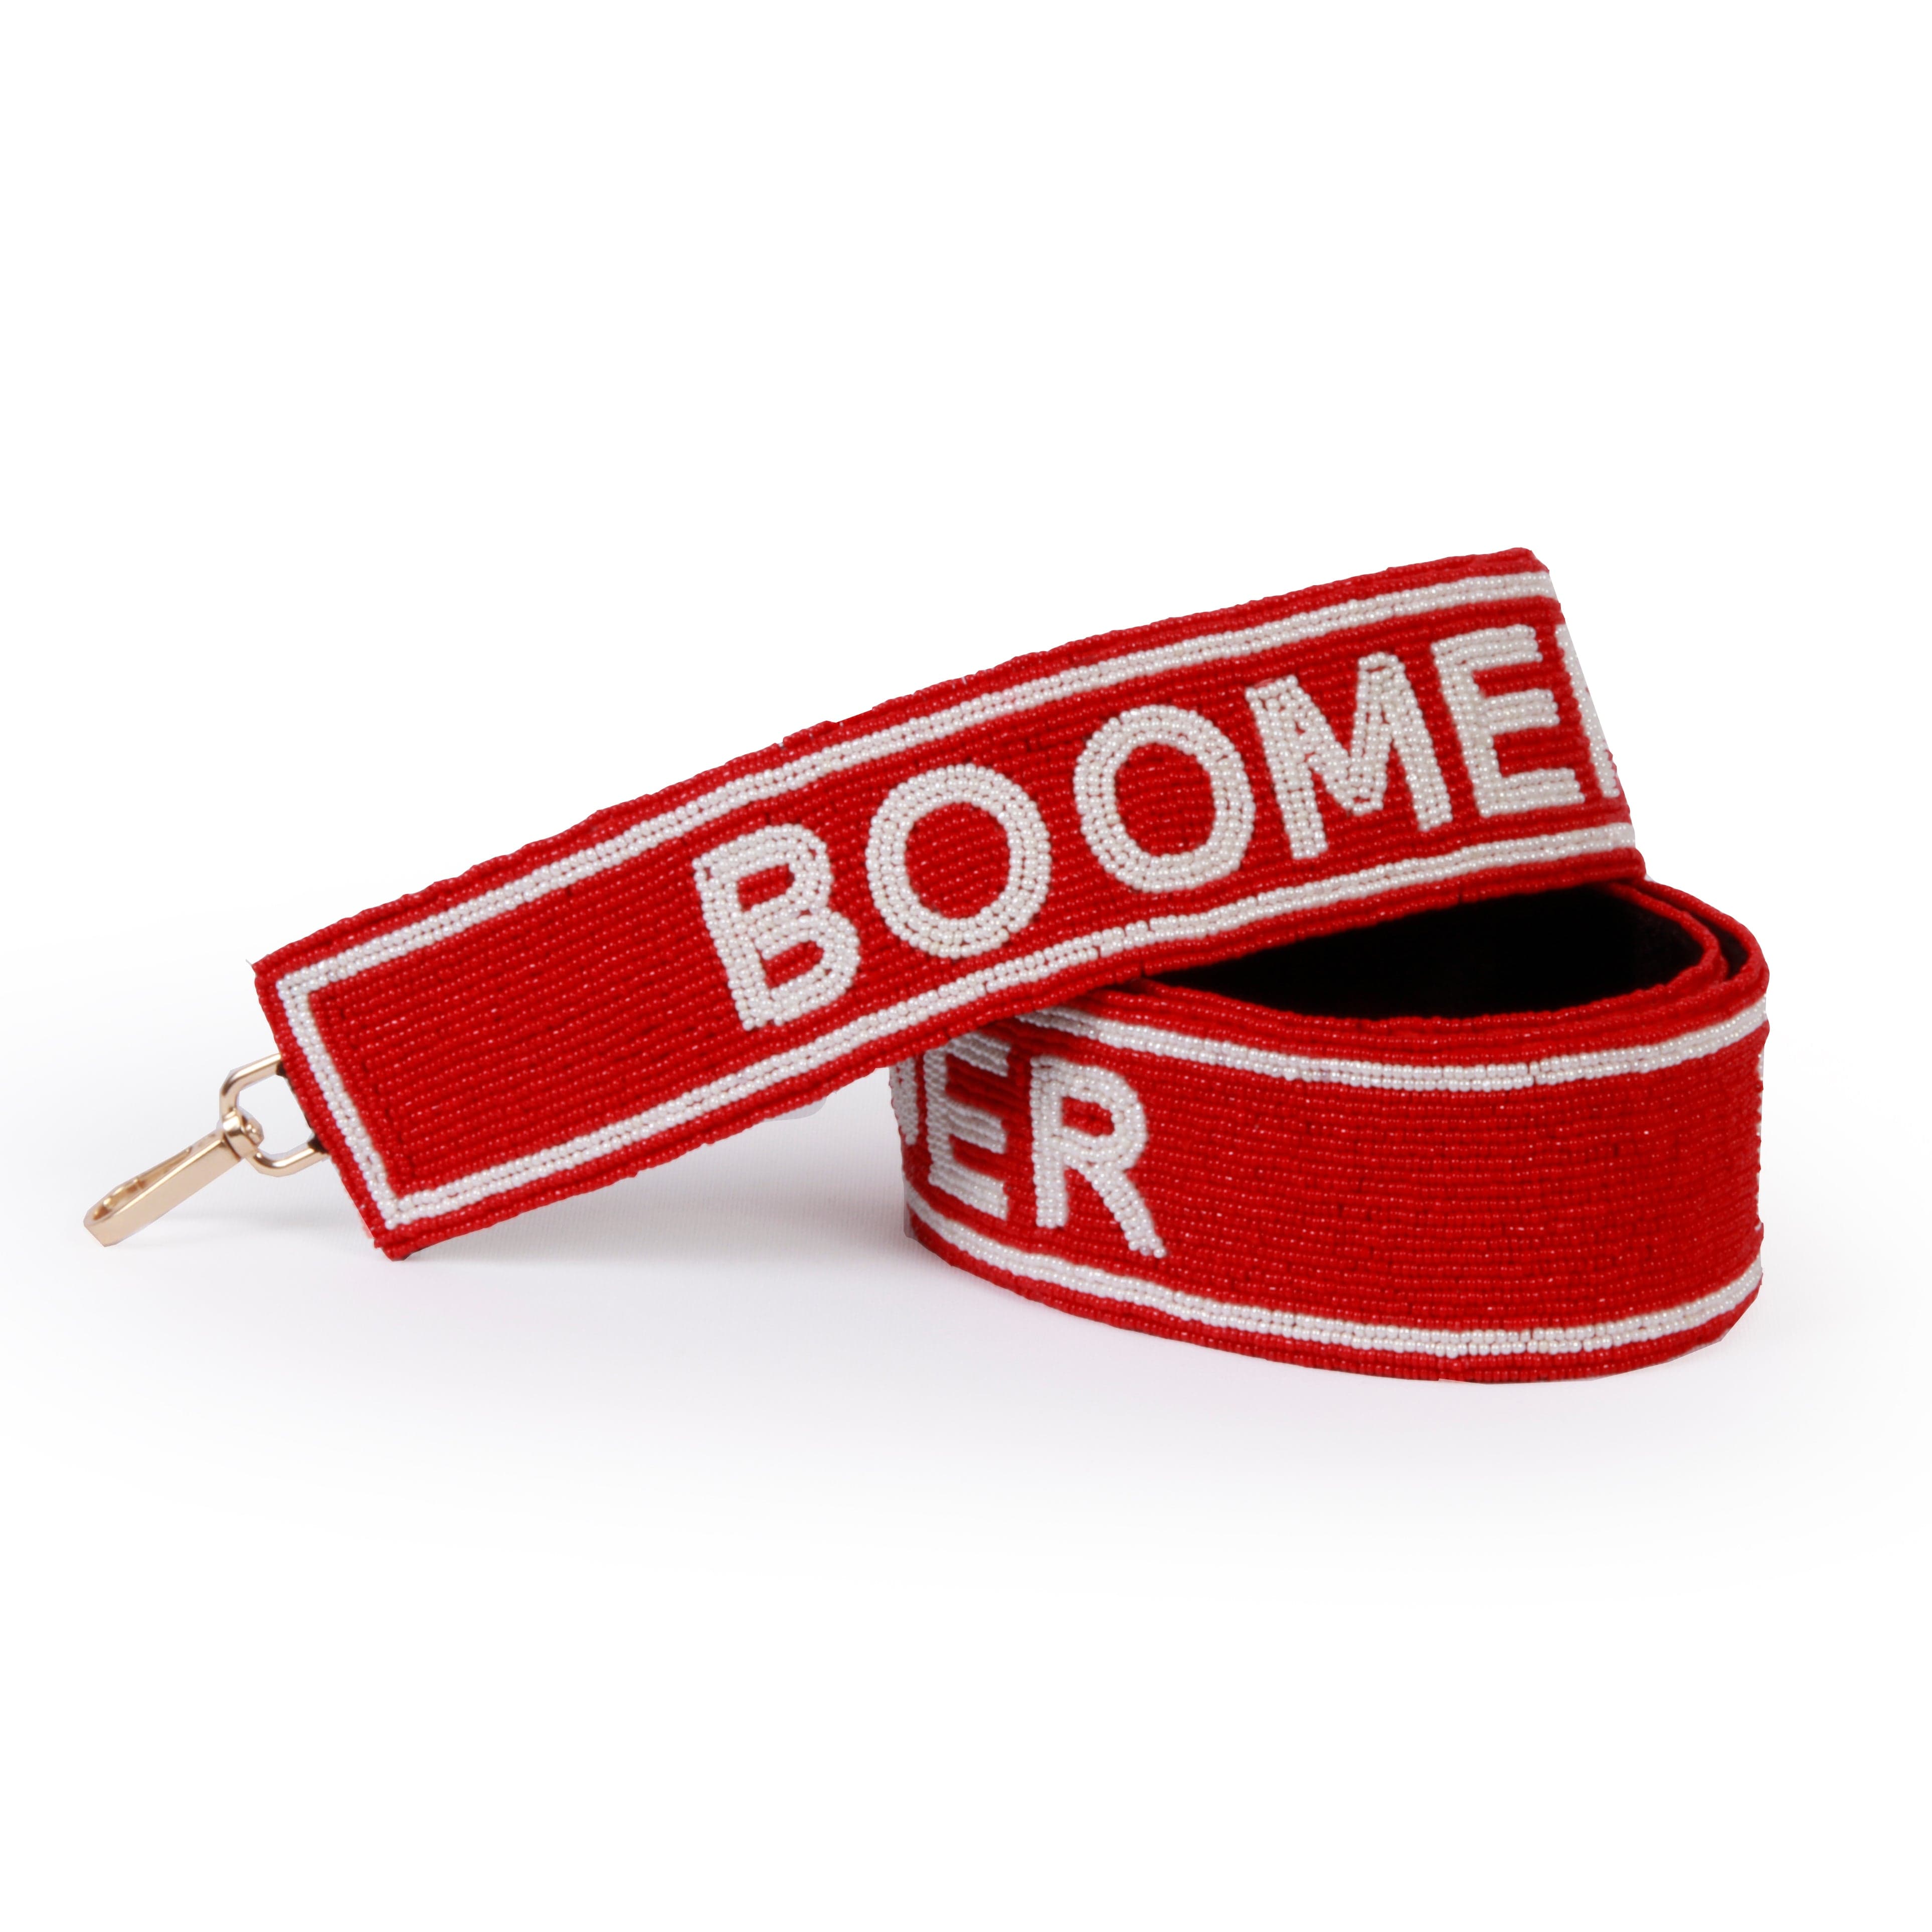 University of Oklahoma Boomer Sooner Beaded Purse Strap in Crimson and  White by Desden